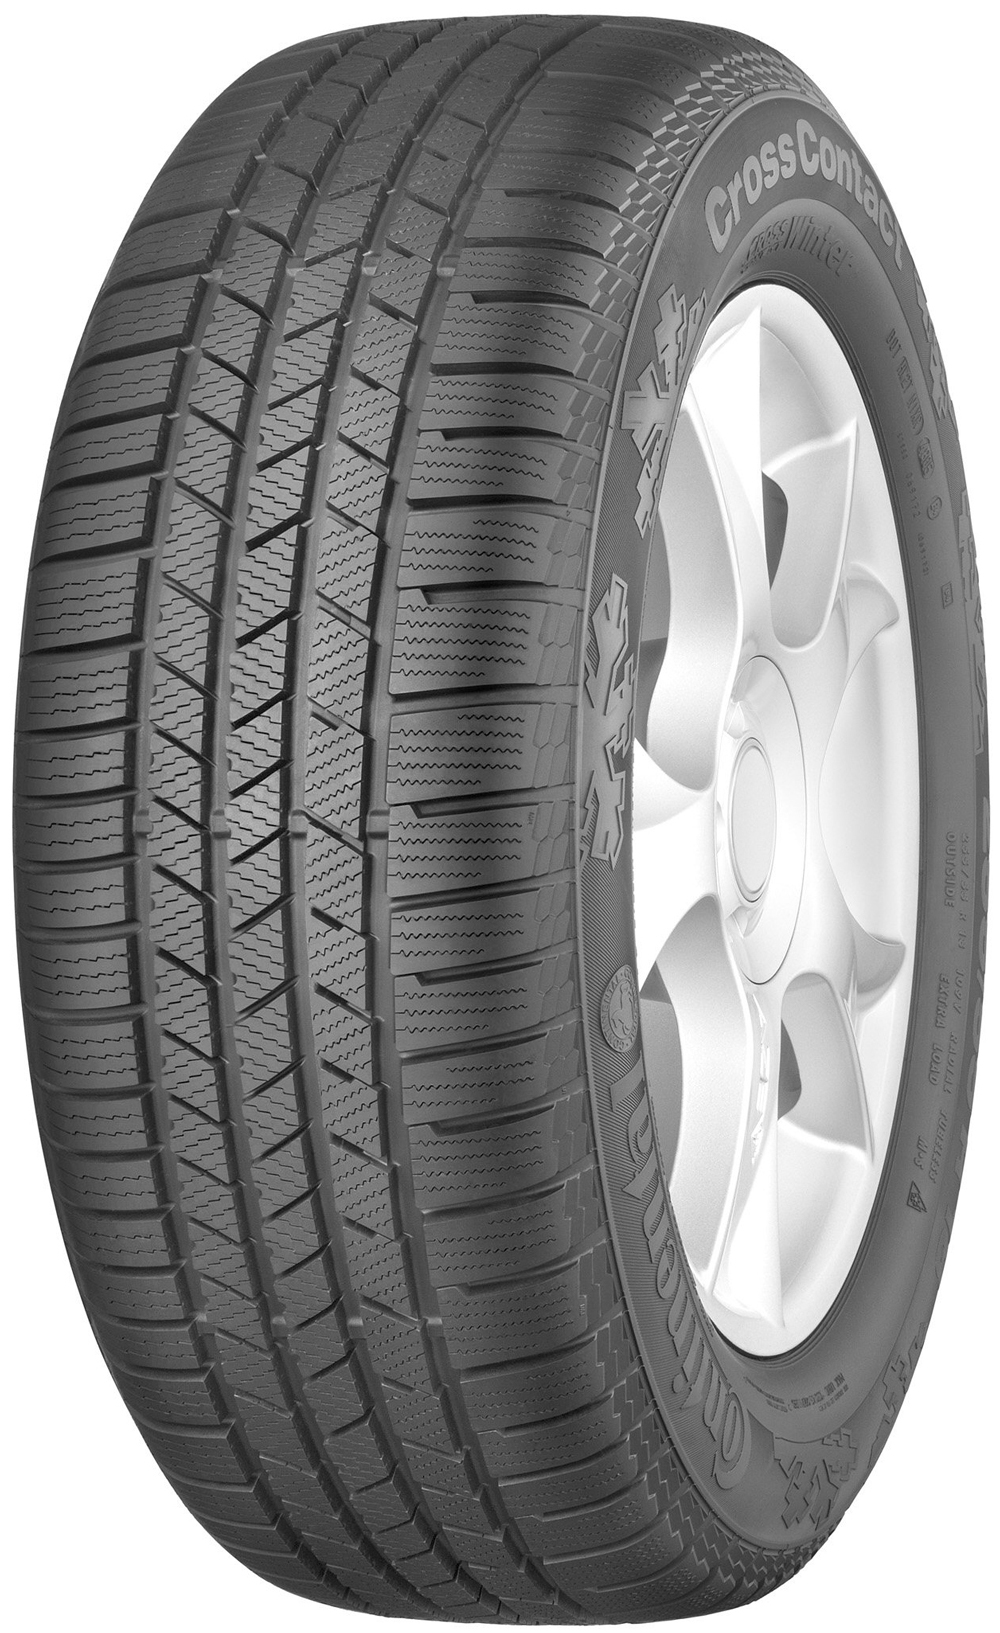 Anvelope auto CONTINENTAL Conti Cross Contact Winter MERCEDES FP 235/60 R17 102